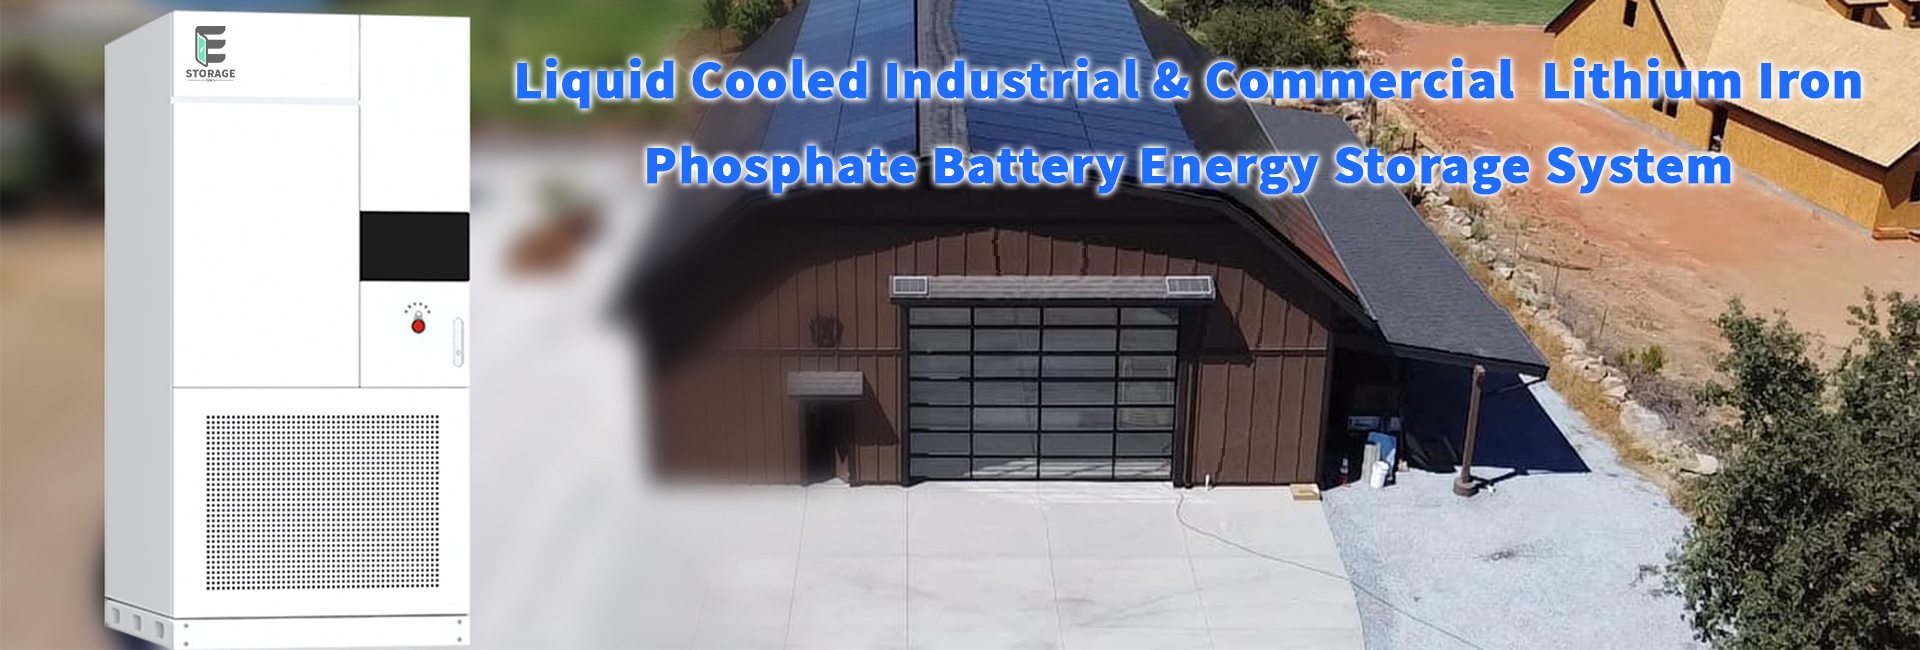 Liquid Cooled Industrial & Commercial  Lithium Iron Phosphate Battery Energy Storage System